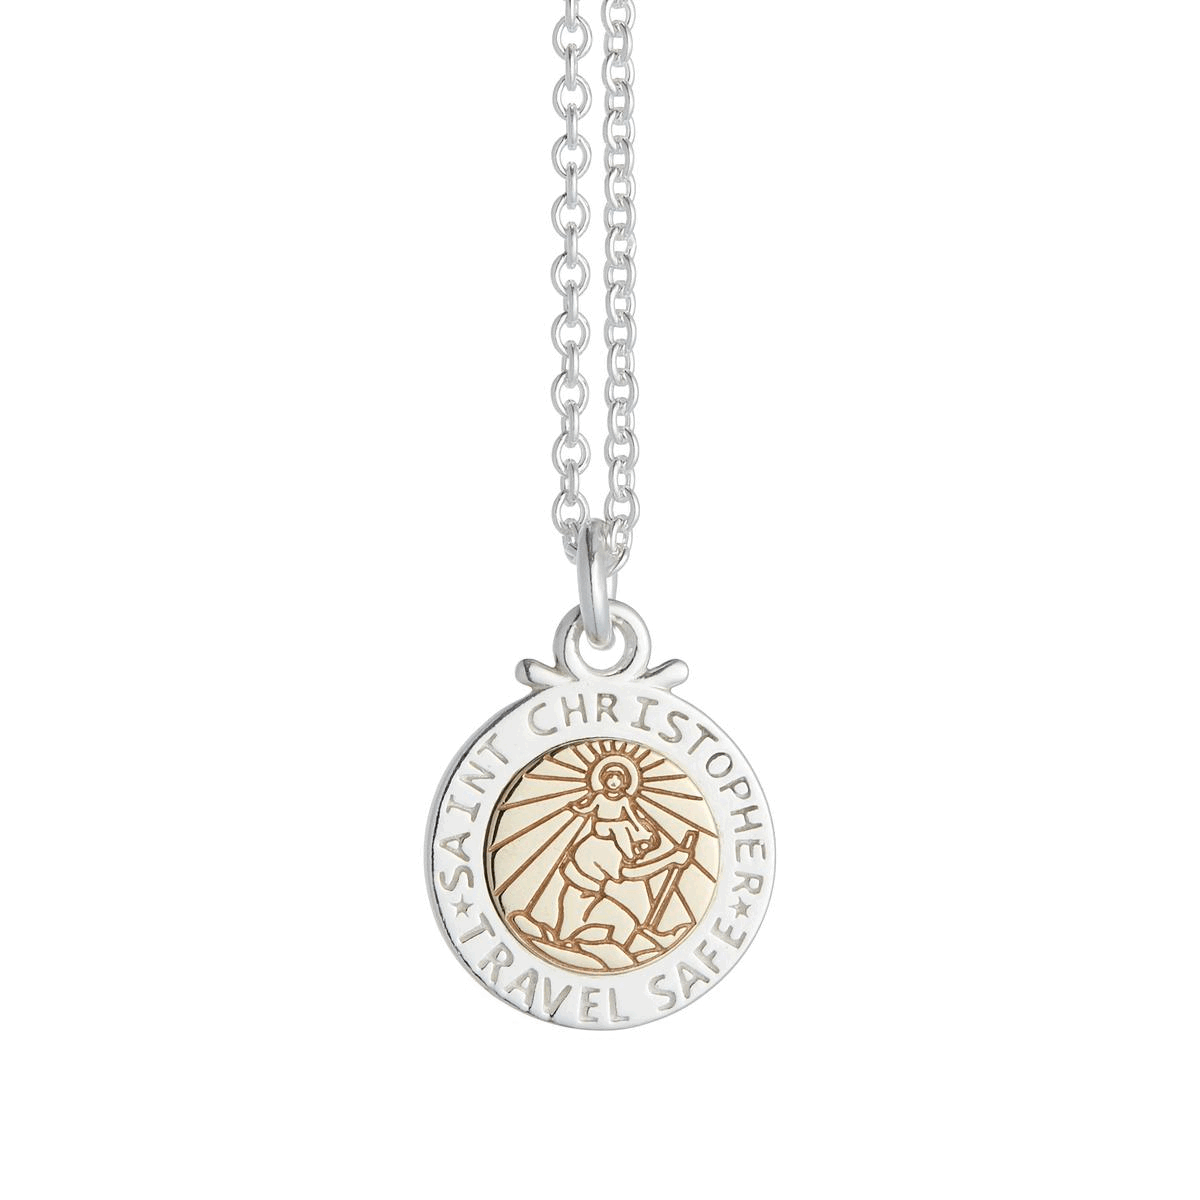 Personalised St Christopher Necklace - Silver & Solid Gold